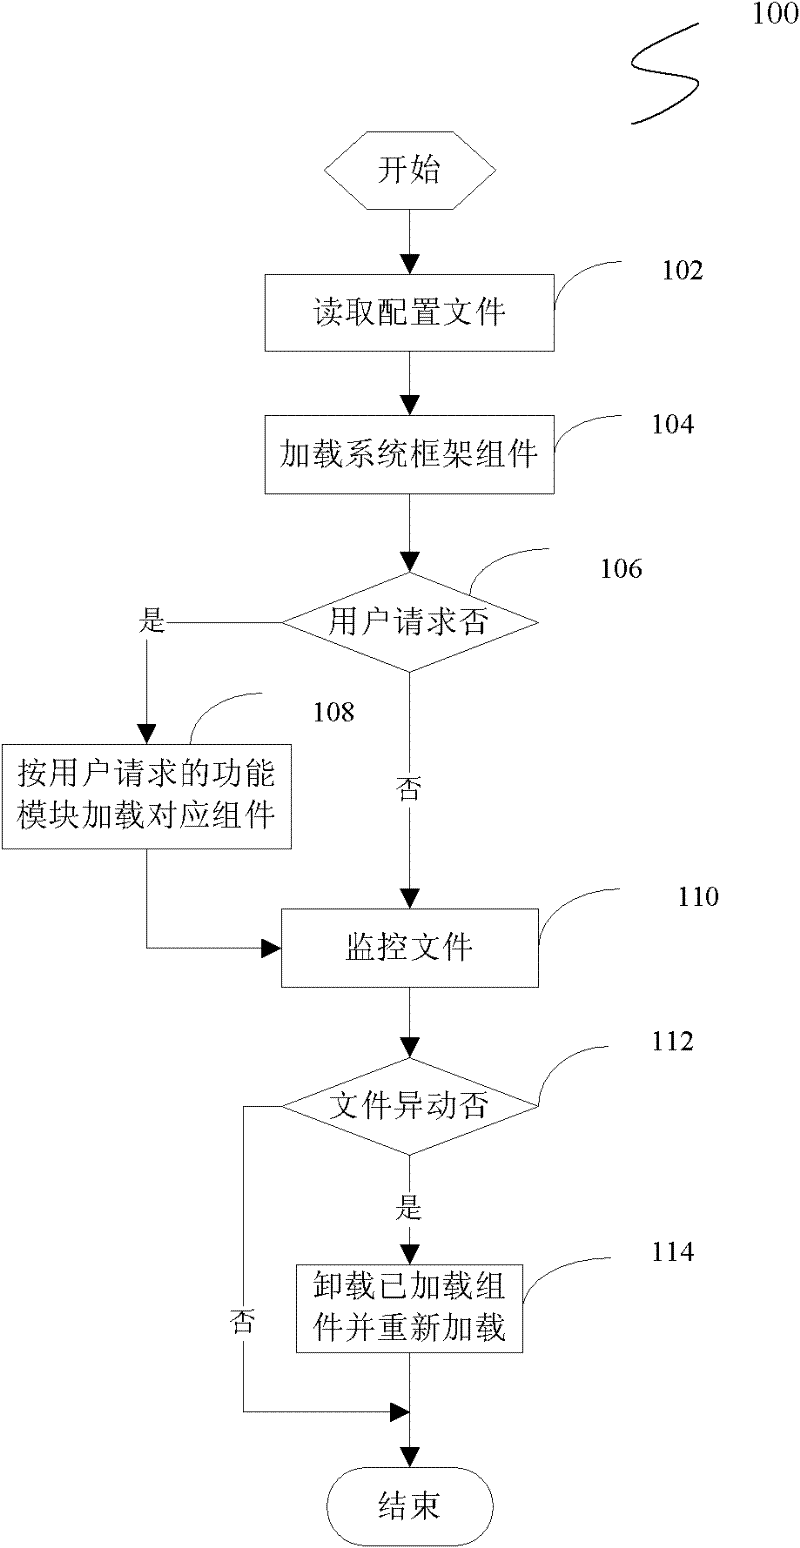 Method and system for dynamically loading component